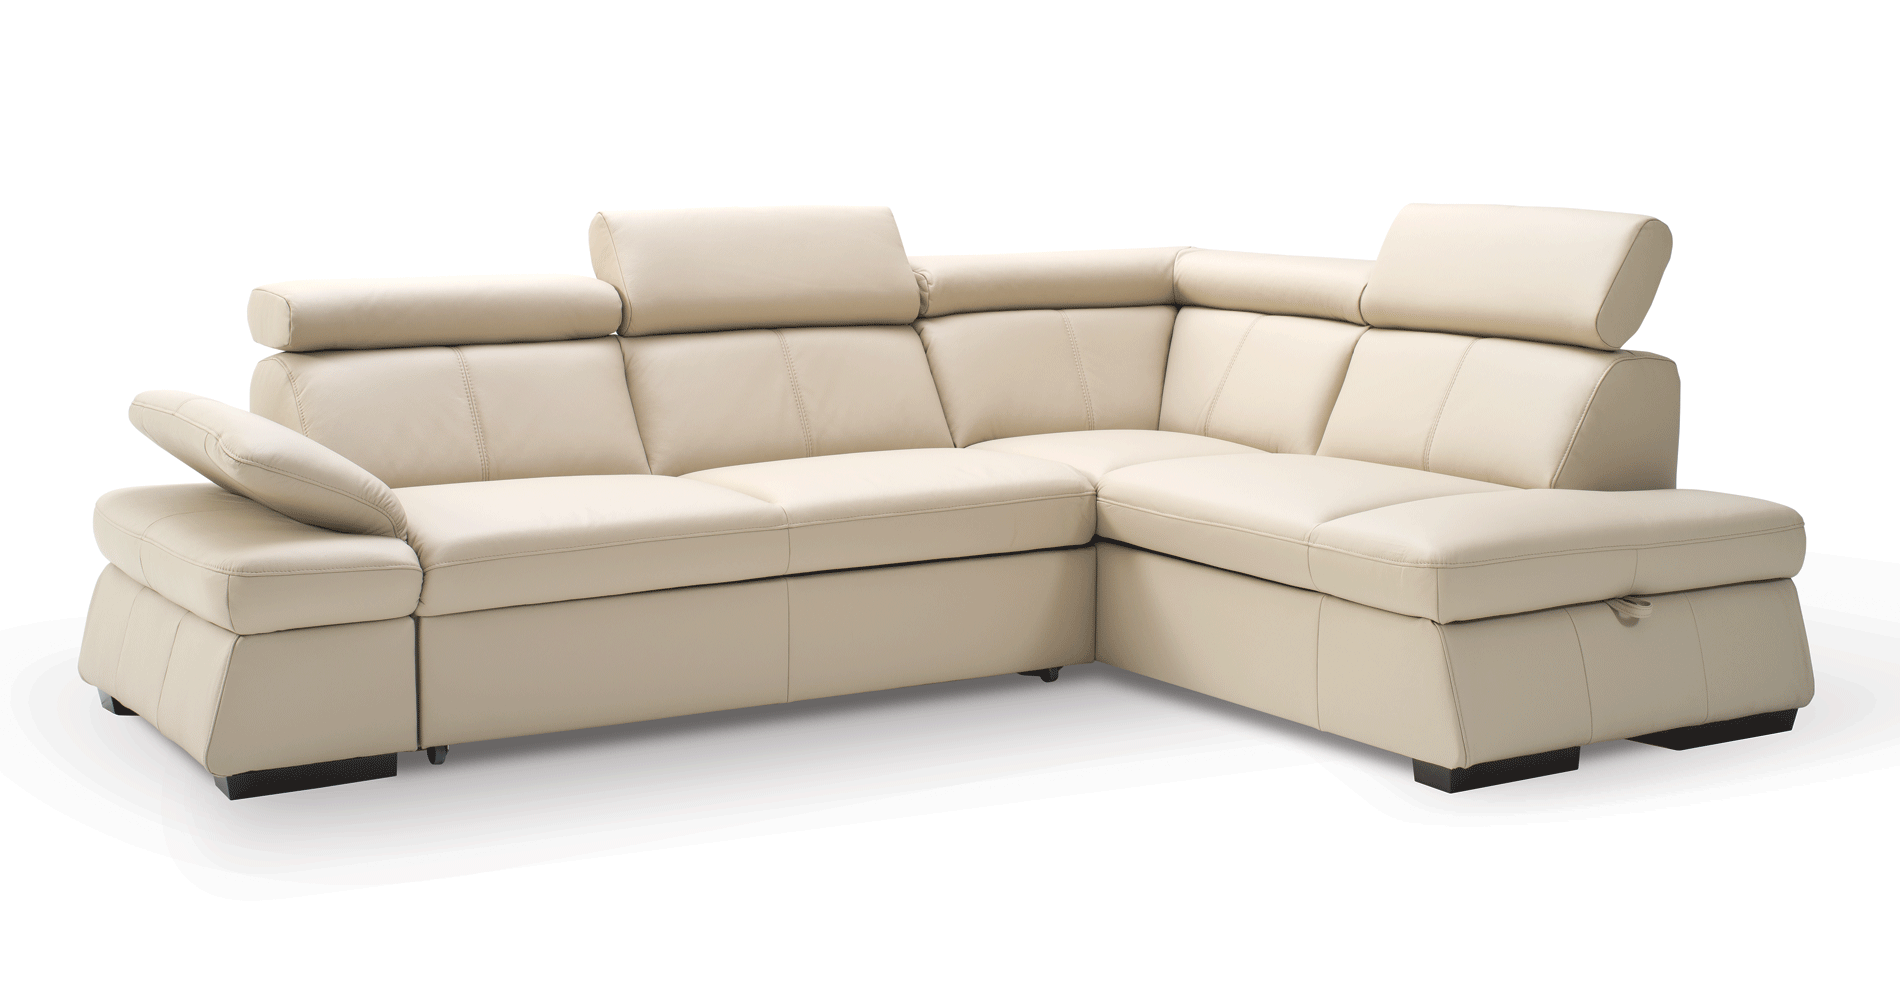 Living Room Furniture Reclining and Sliding Seats Sets Malpensa Sectional w/ Bed & storage